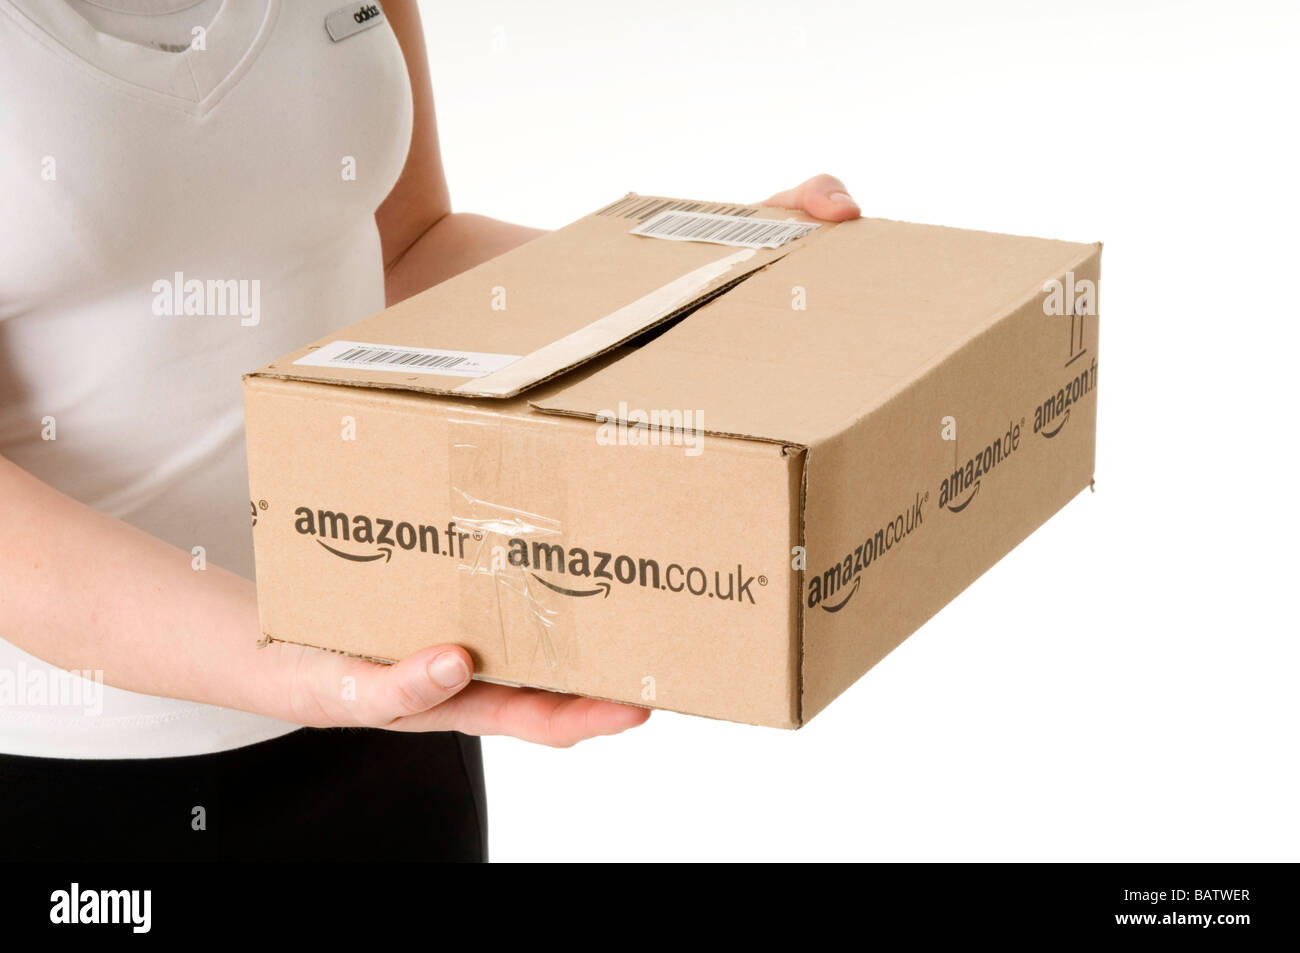 amazon online on line book retailer shop store books bookshop bookstore mail order shipping box boxes package packages parcel pa Stock Photo